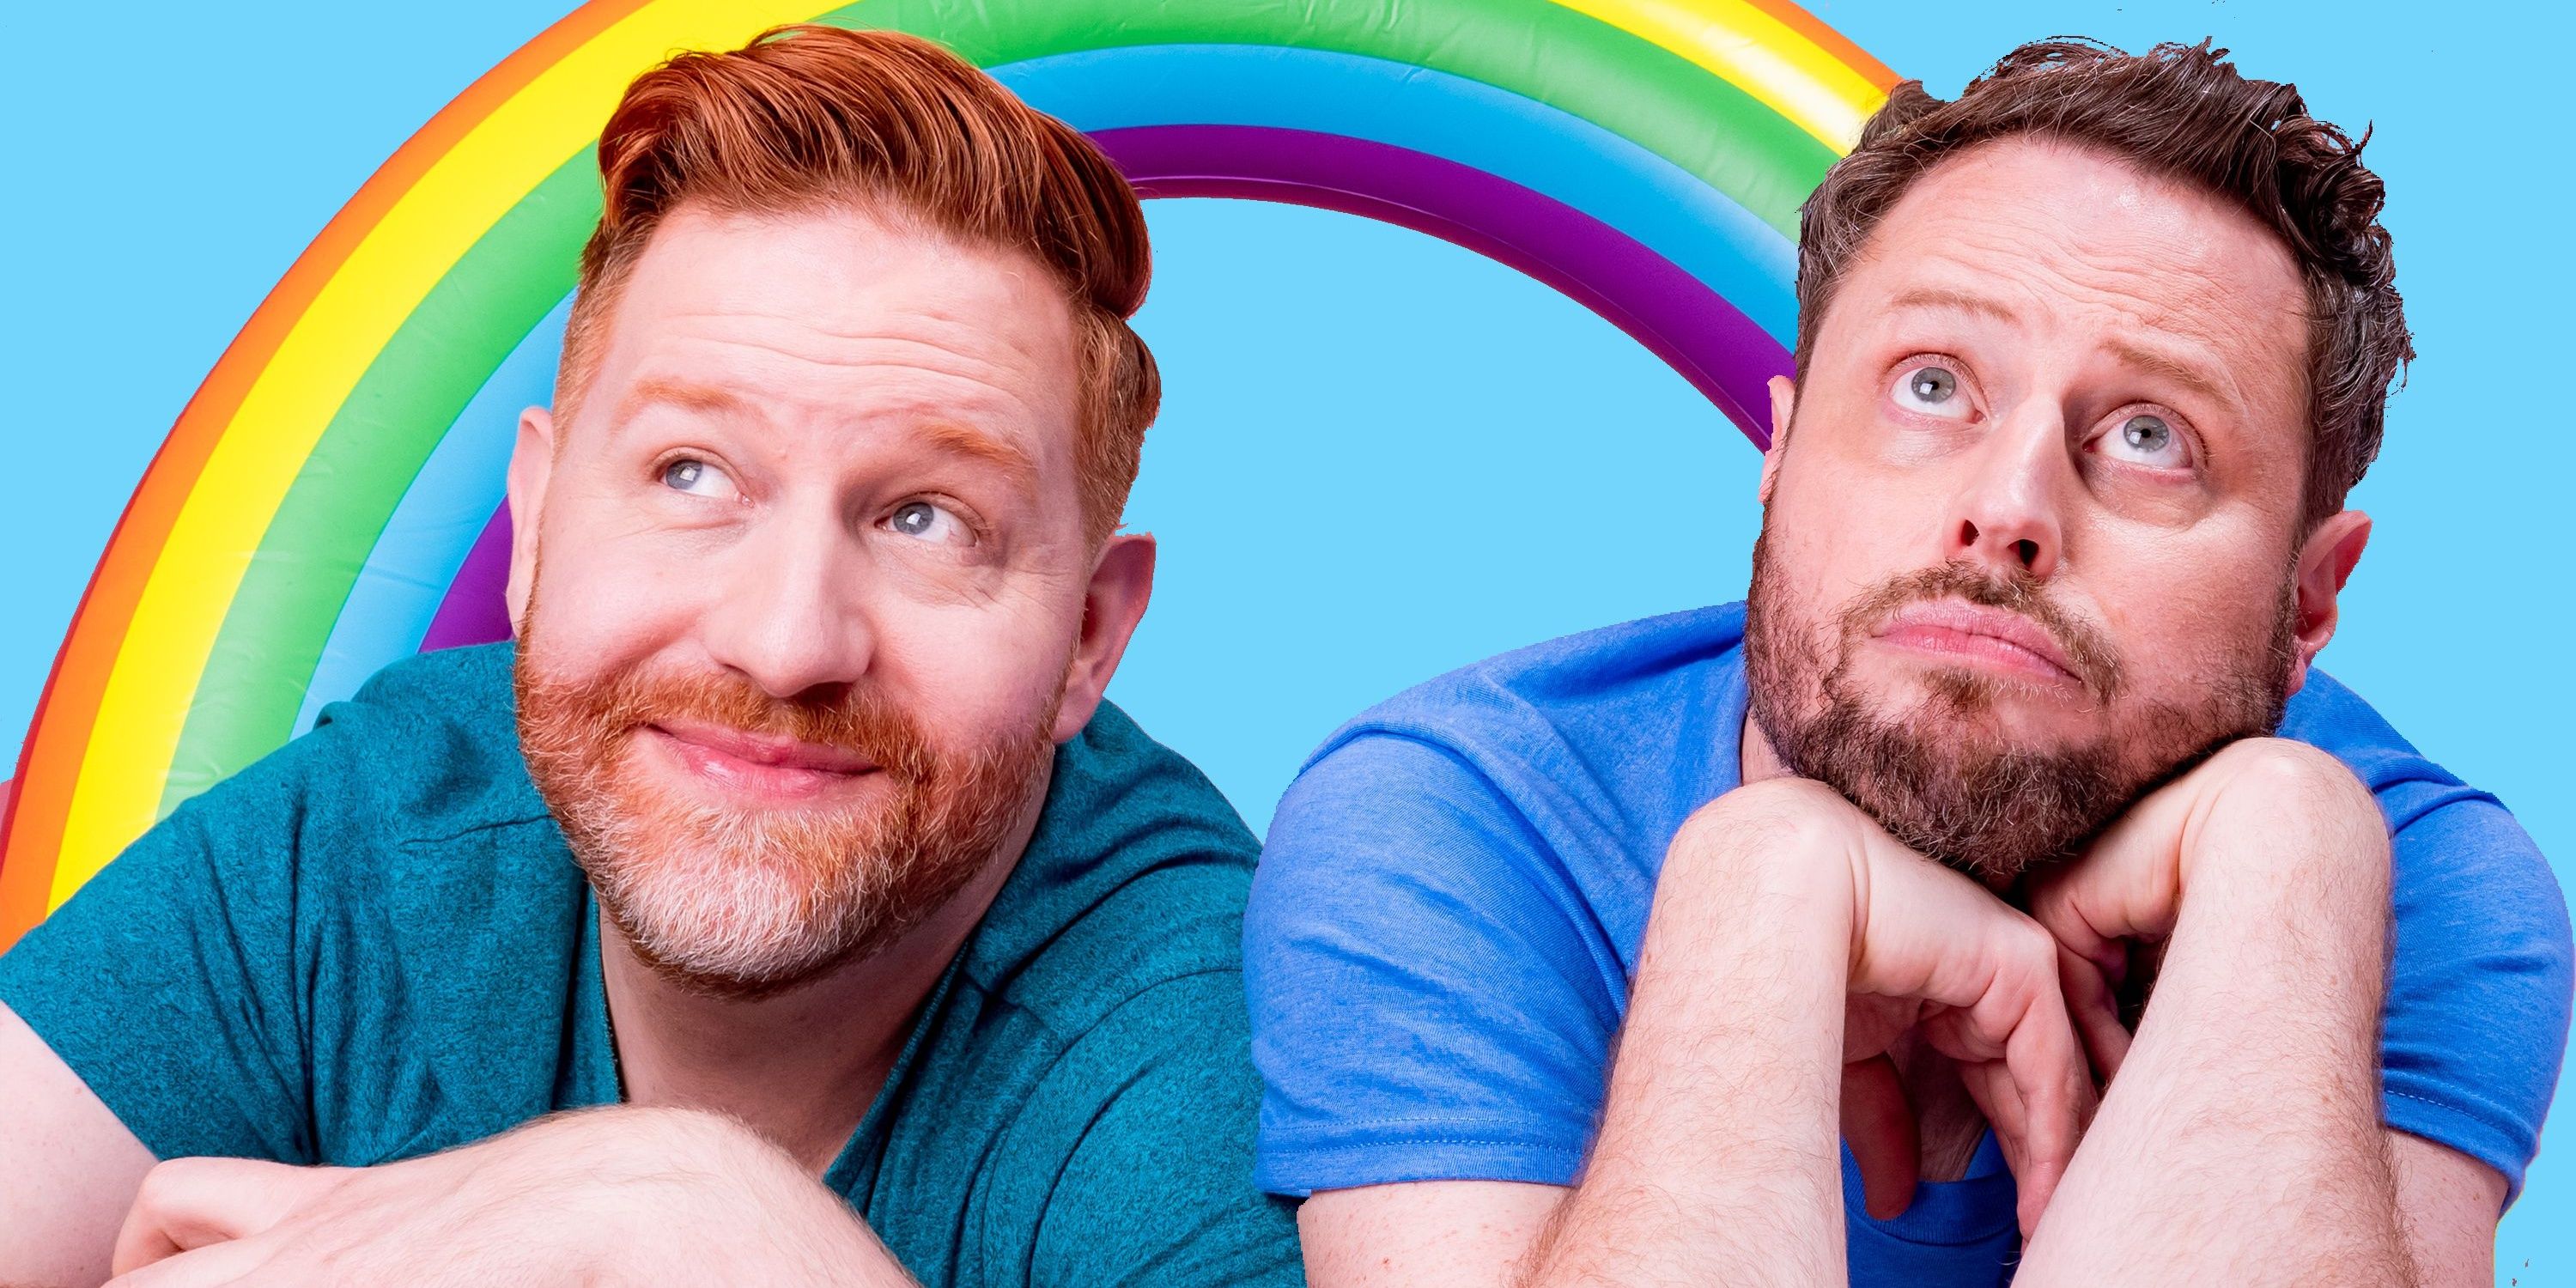 Matt Marr and Jake Anthony of Reality Gays wearing blue shirts and staring away with a rainbow in the background